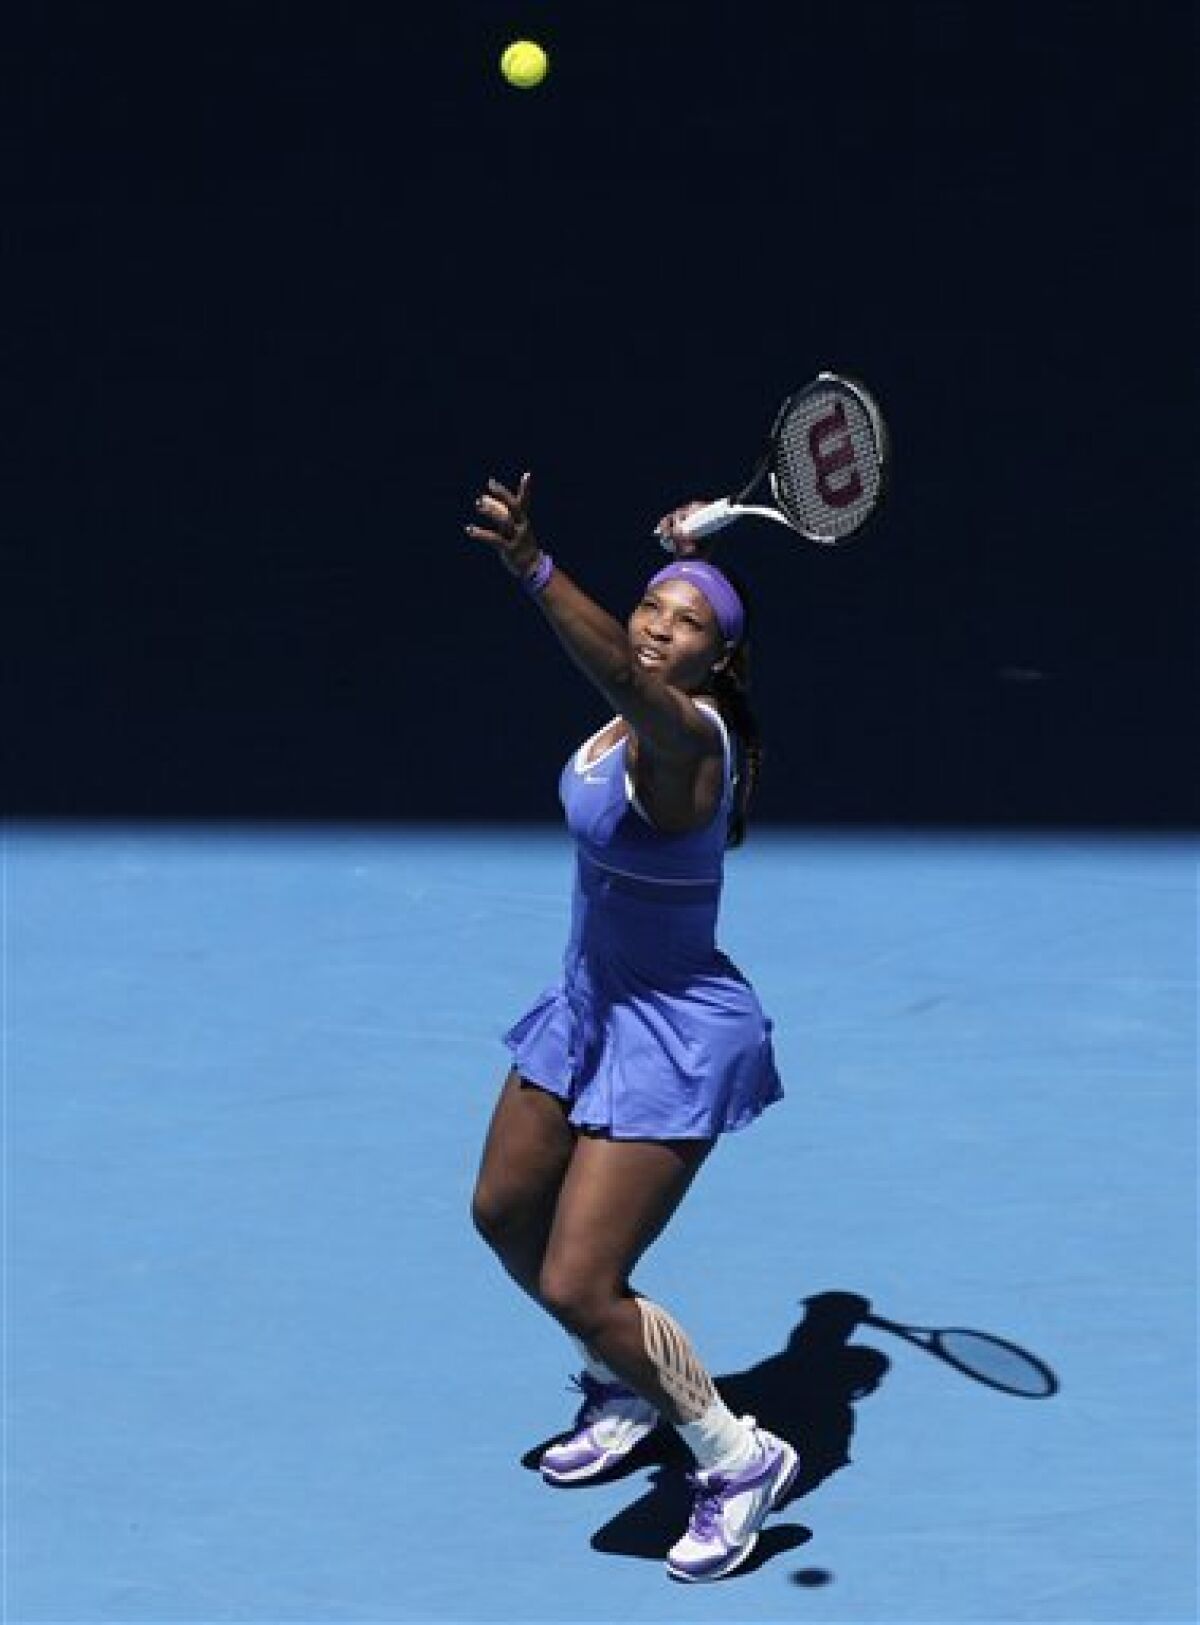 Serena Williams of the US hits a forehand return to Barbora Zahlavova Strycova of the Czech Republic during their second round match at the Australian Open tennis championship, in Melbourne, Australia, Thursday, Jan. 19, 2012. (AP Photo/John Donegan)